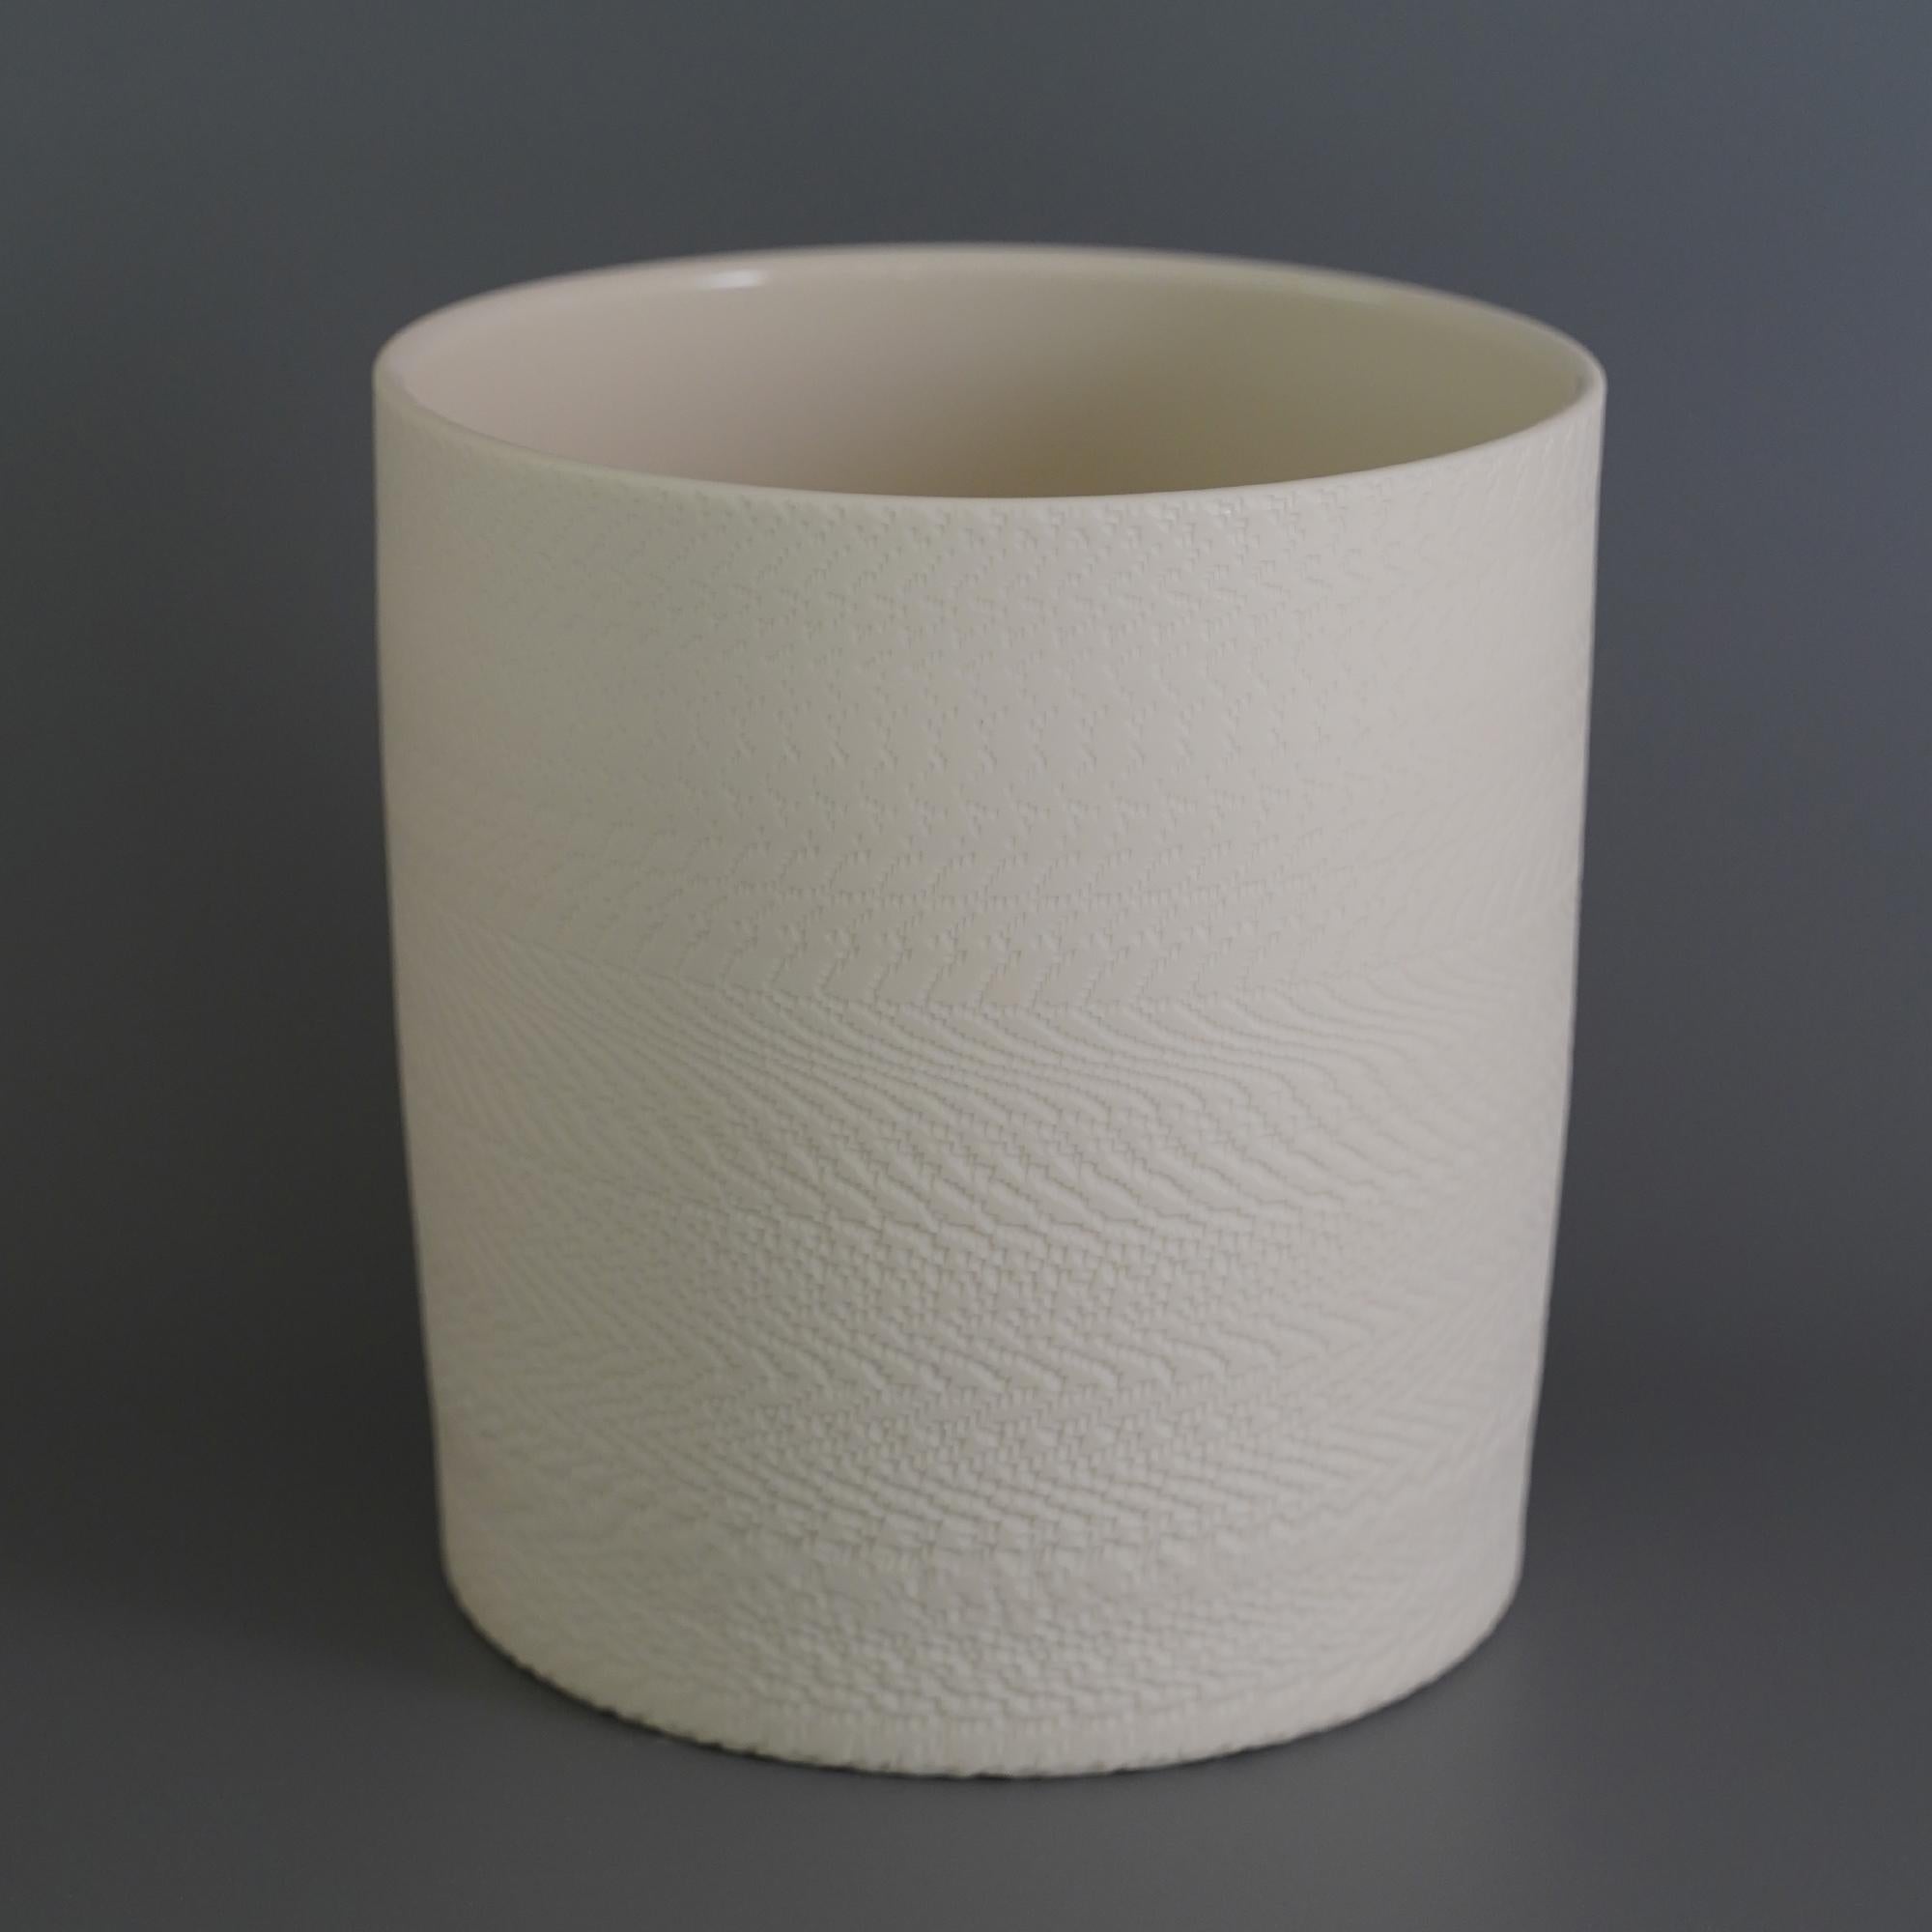 Helice vase zylinder by Studio Cúze
Dimensions: W 17.5 x H 18 cm
Materials: ceramic

This cylindrical vase is a masterpiece of pottery art. Yasuhiro Cúze has specially potted this vase and therefore, as with all other products, delivers you a